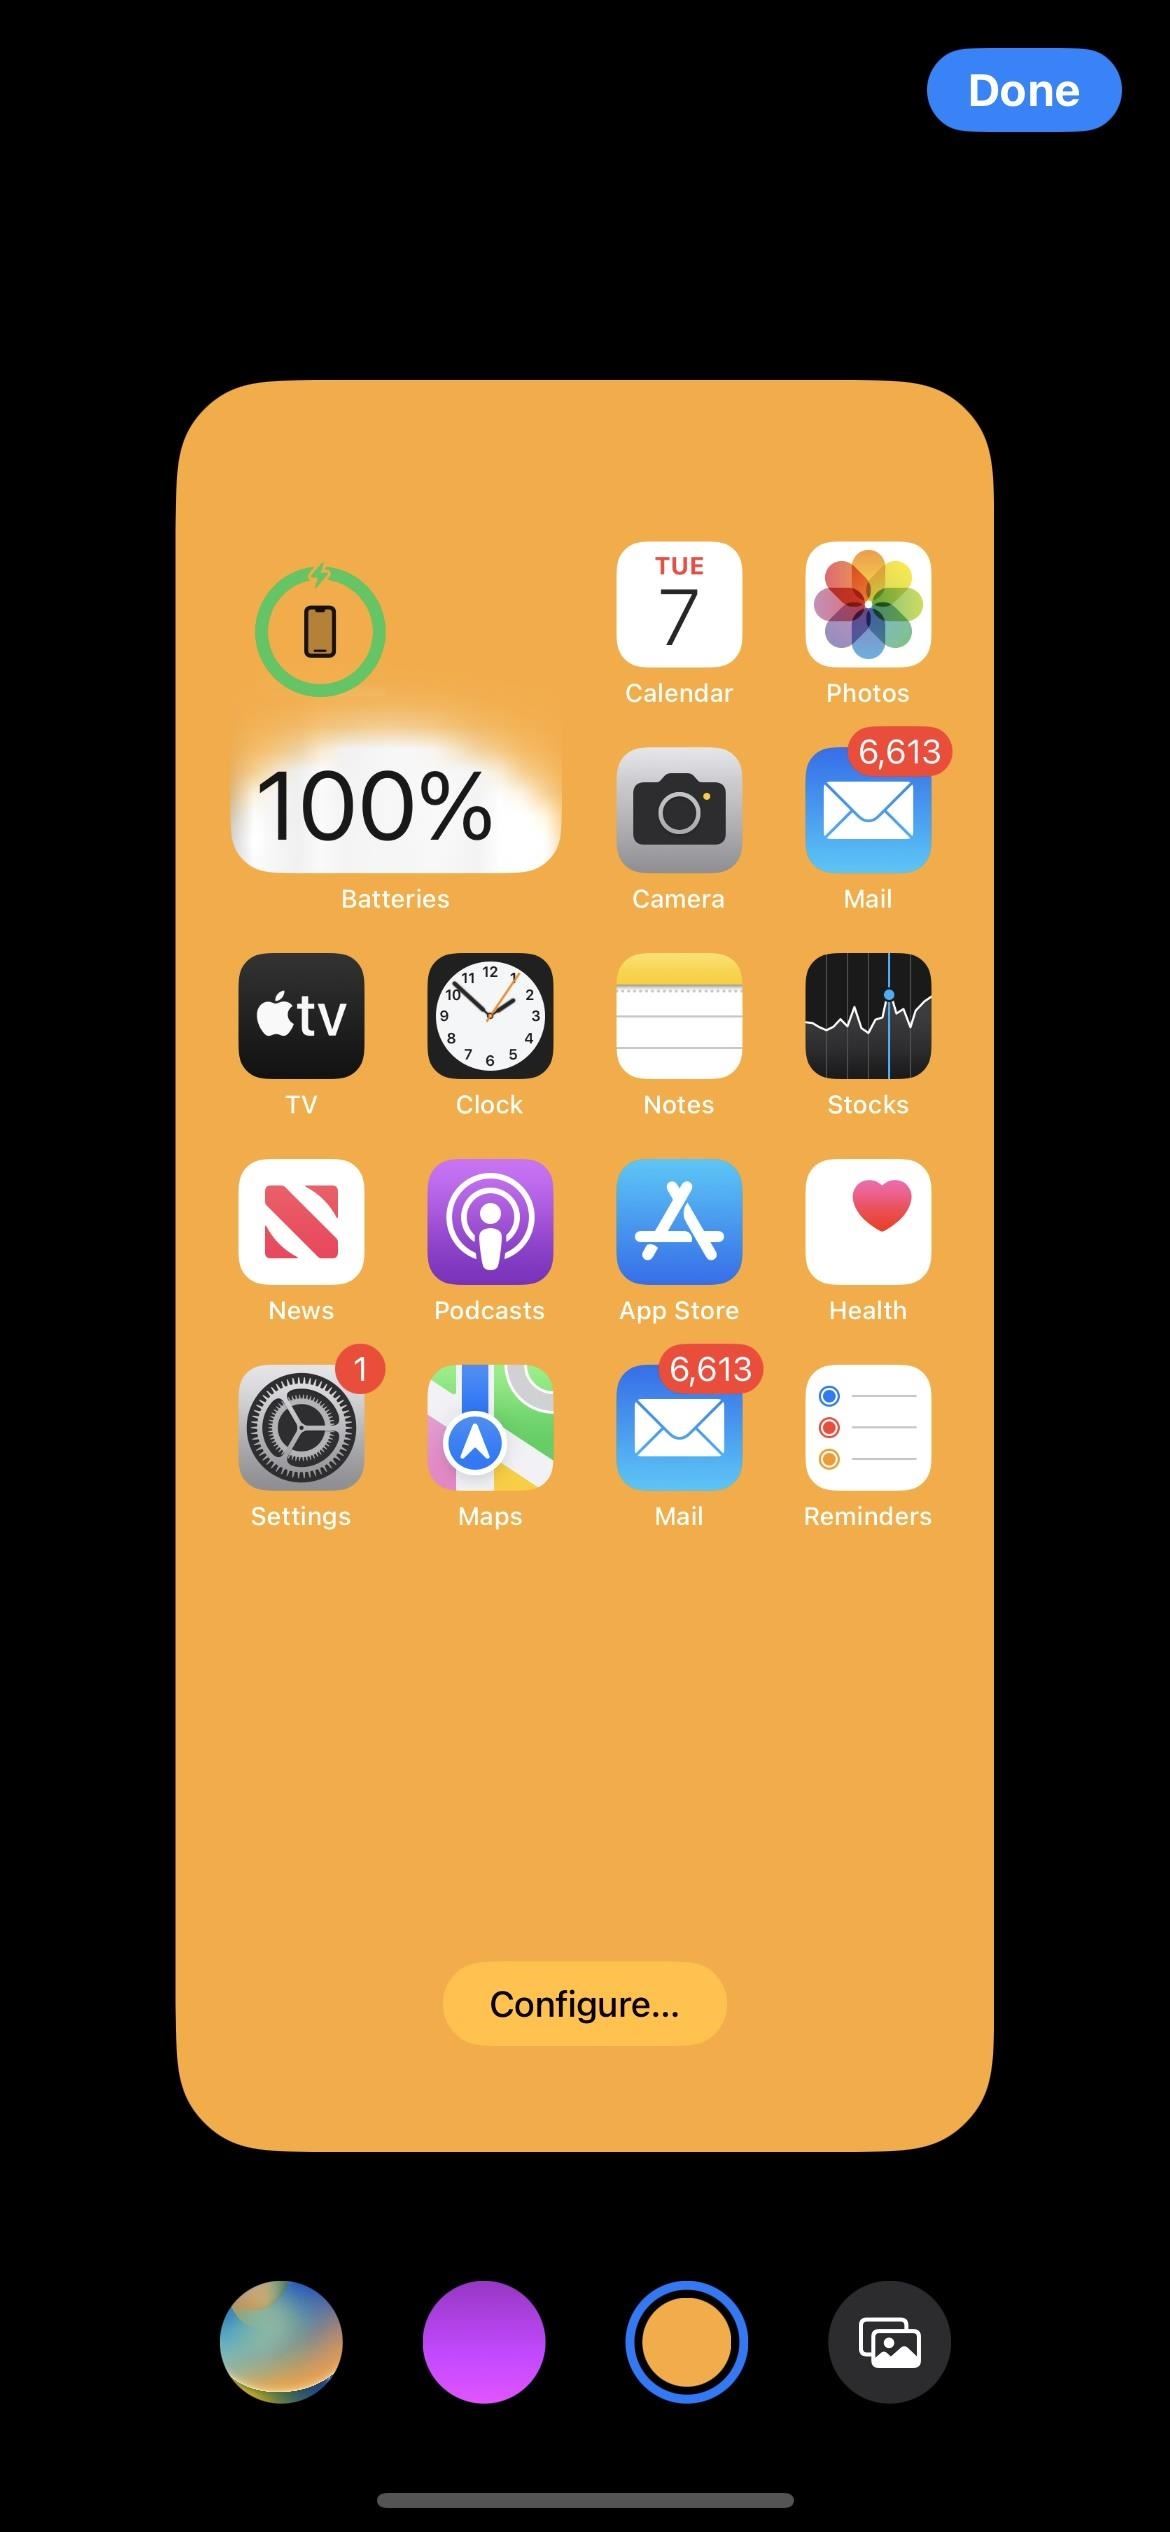 13 Things You Need to Know About Your iPhone's Home Screen in iOS 16